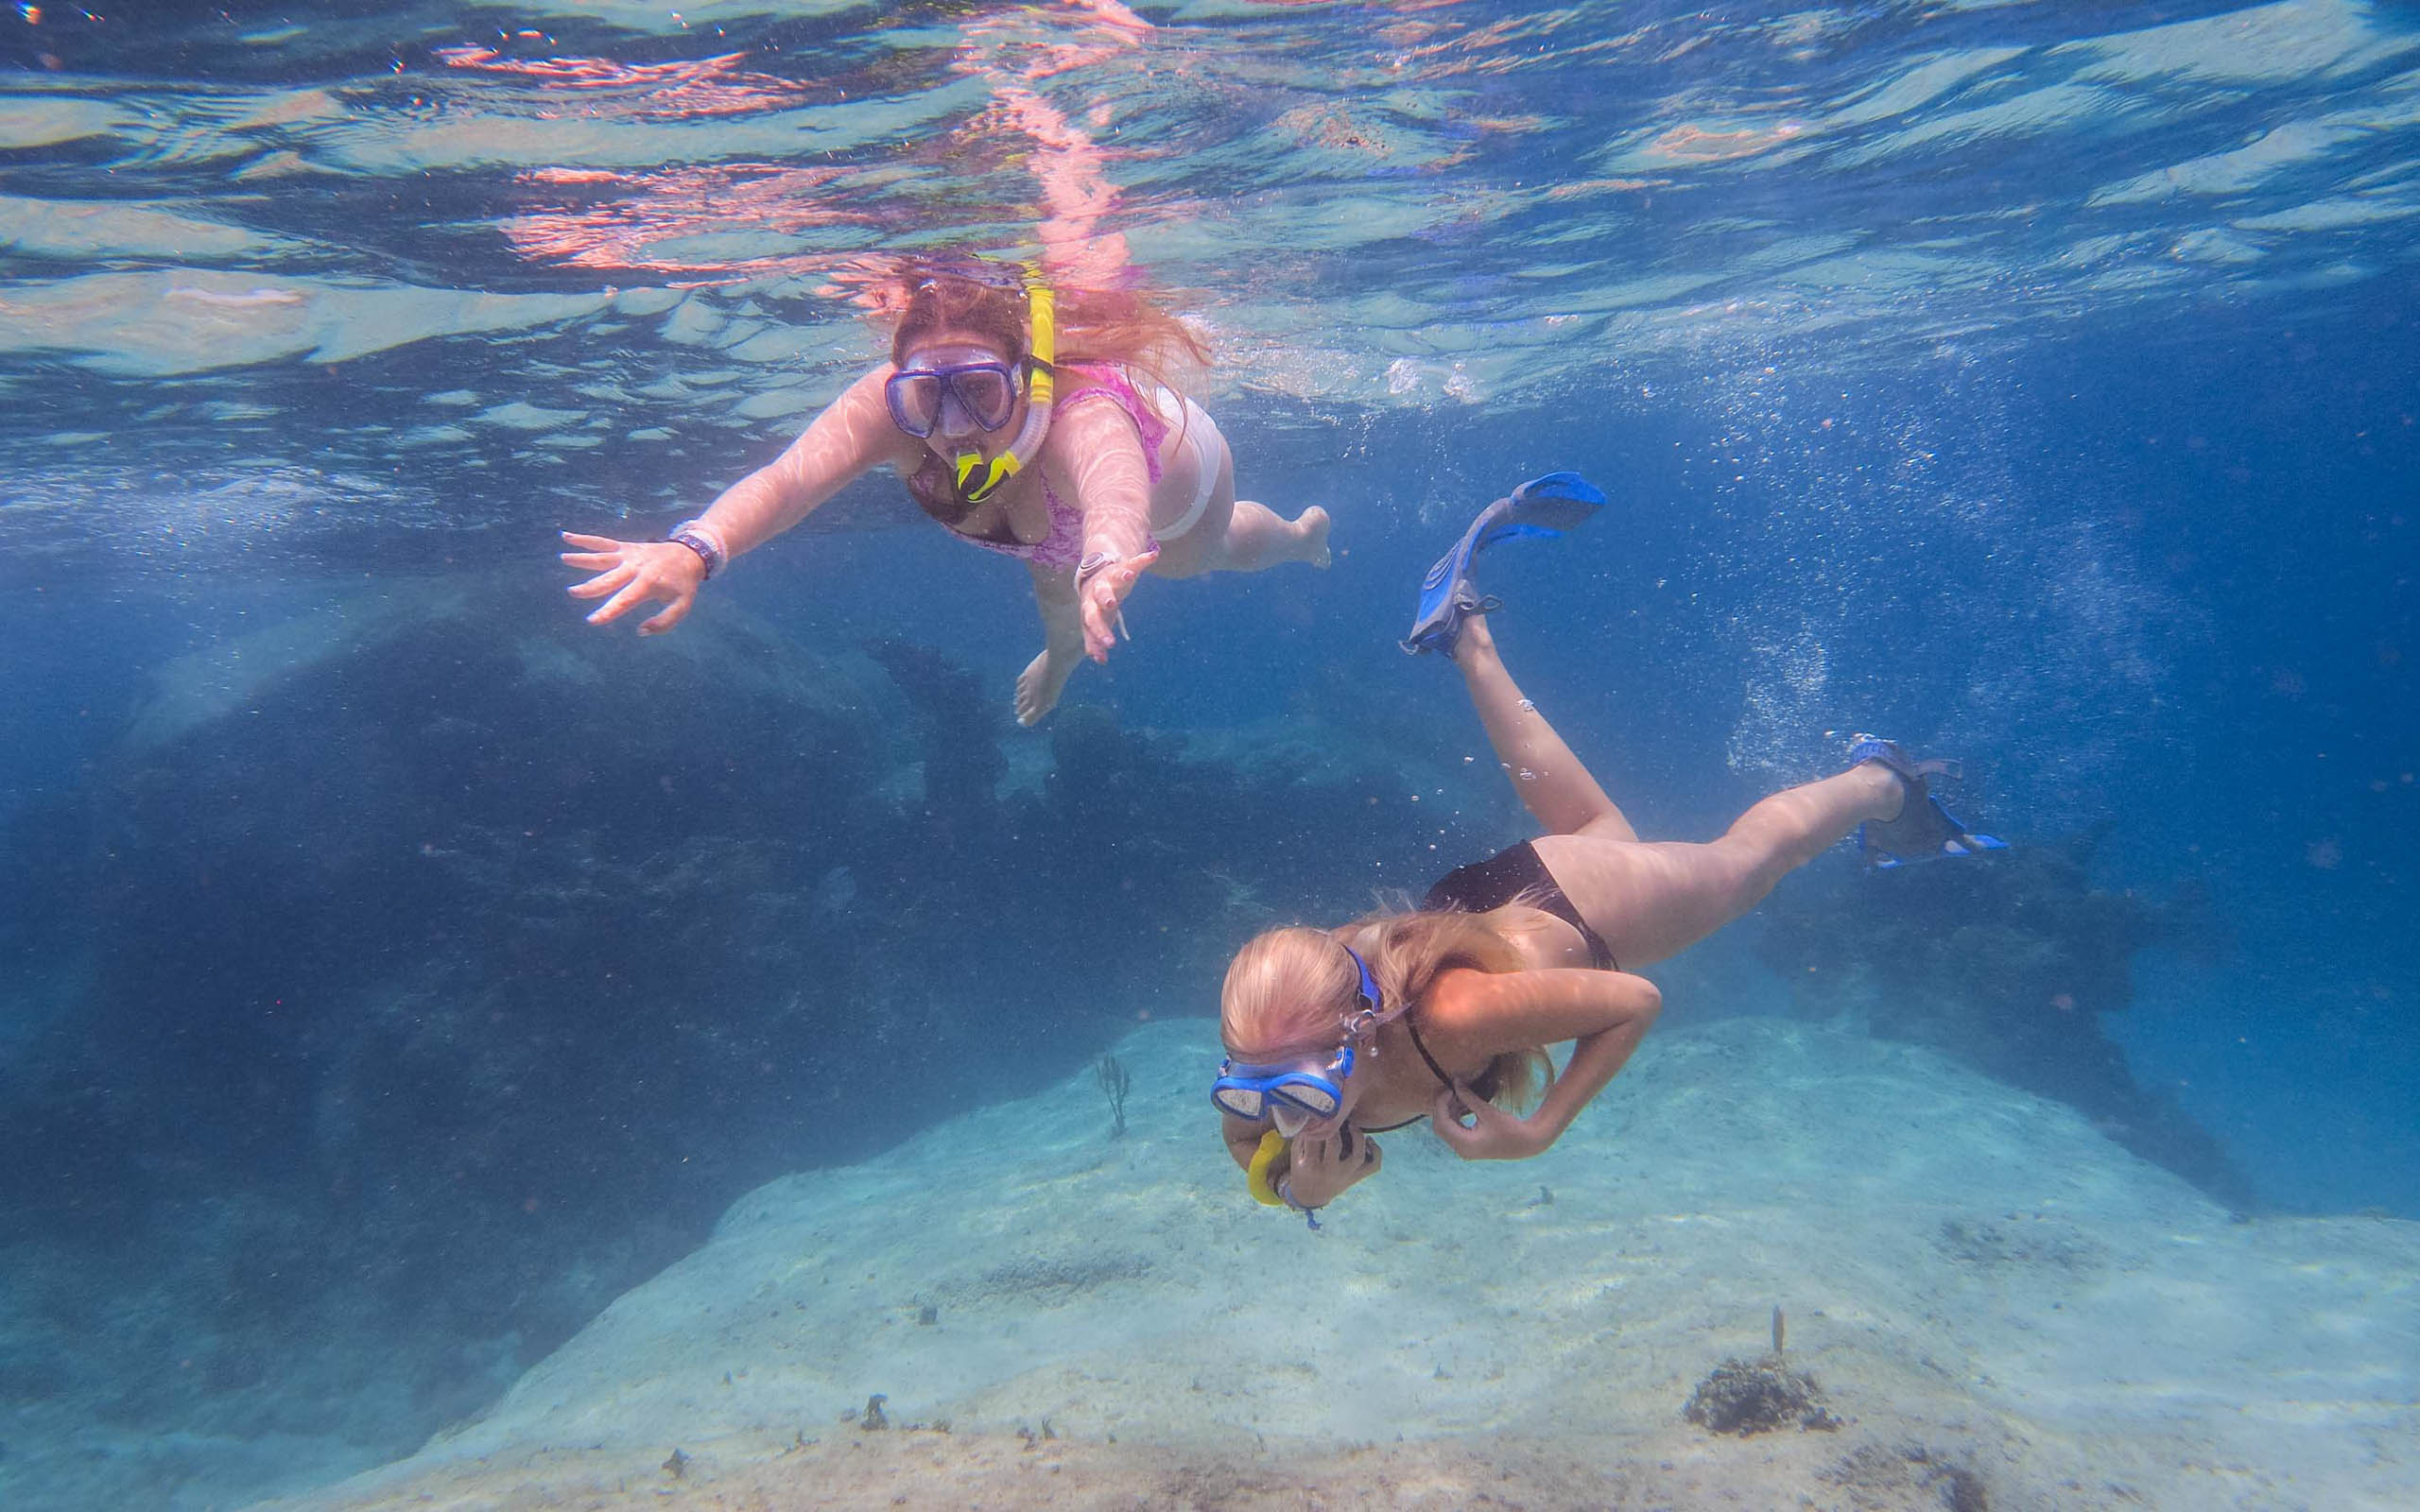 Two people snorkling in the water.